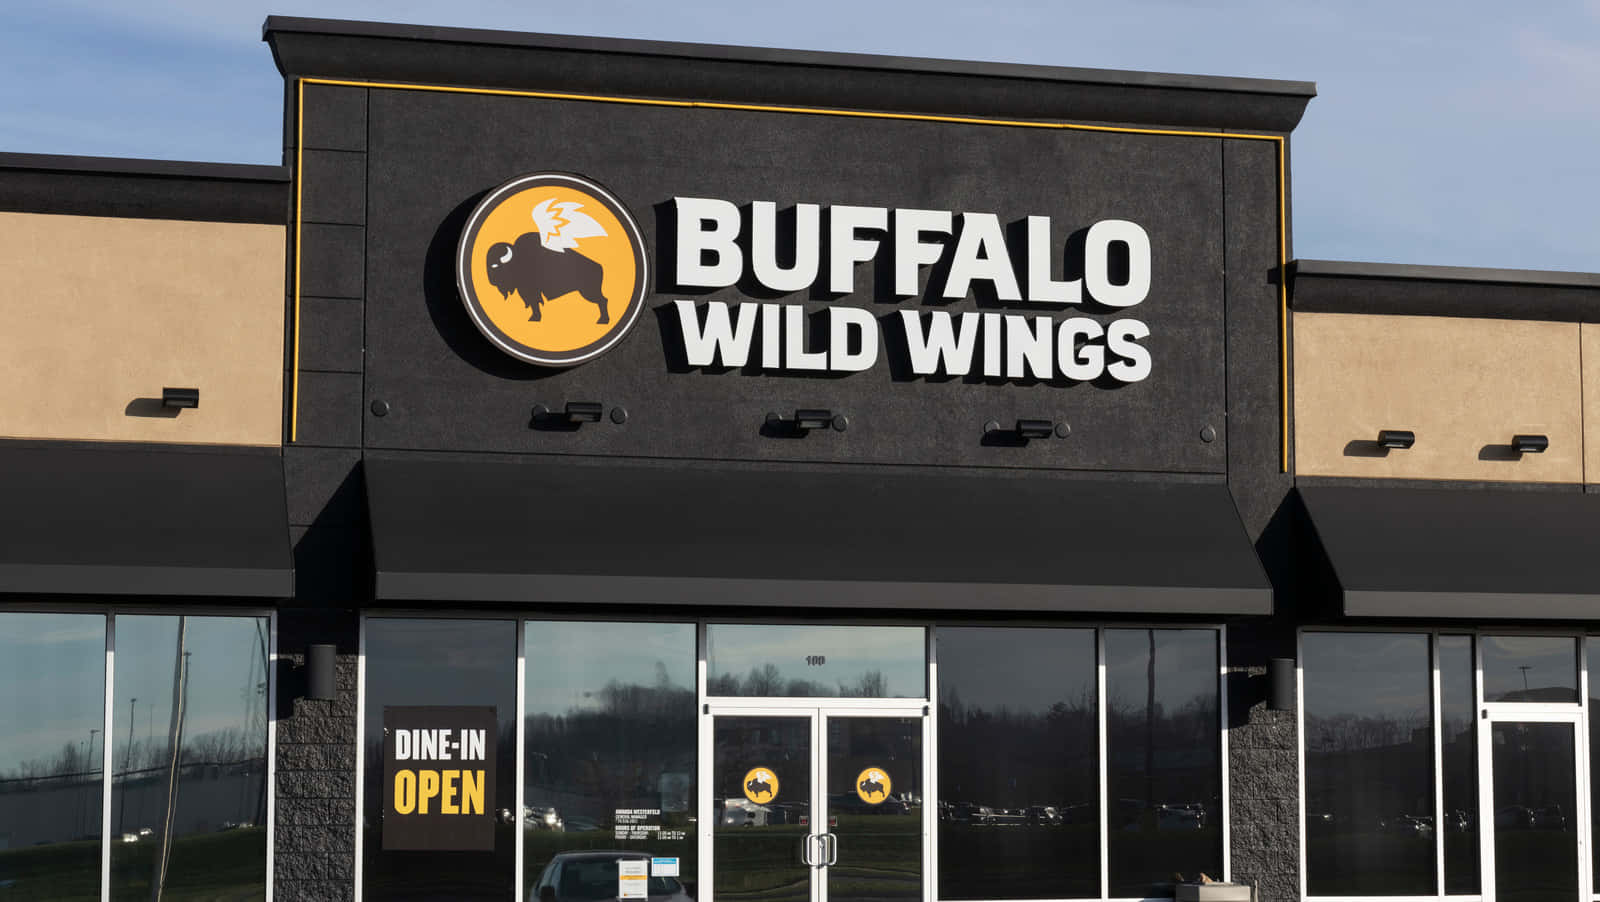 Enjoy a delicious meal of wings and beer at Buffalo Wild Wings!